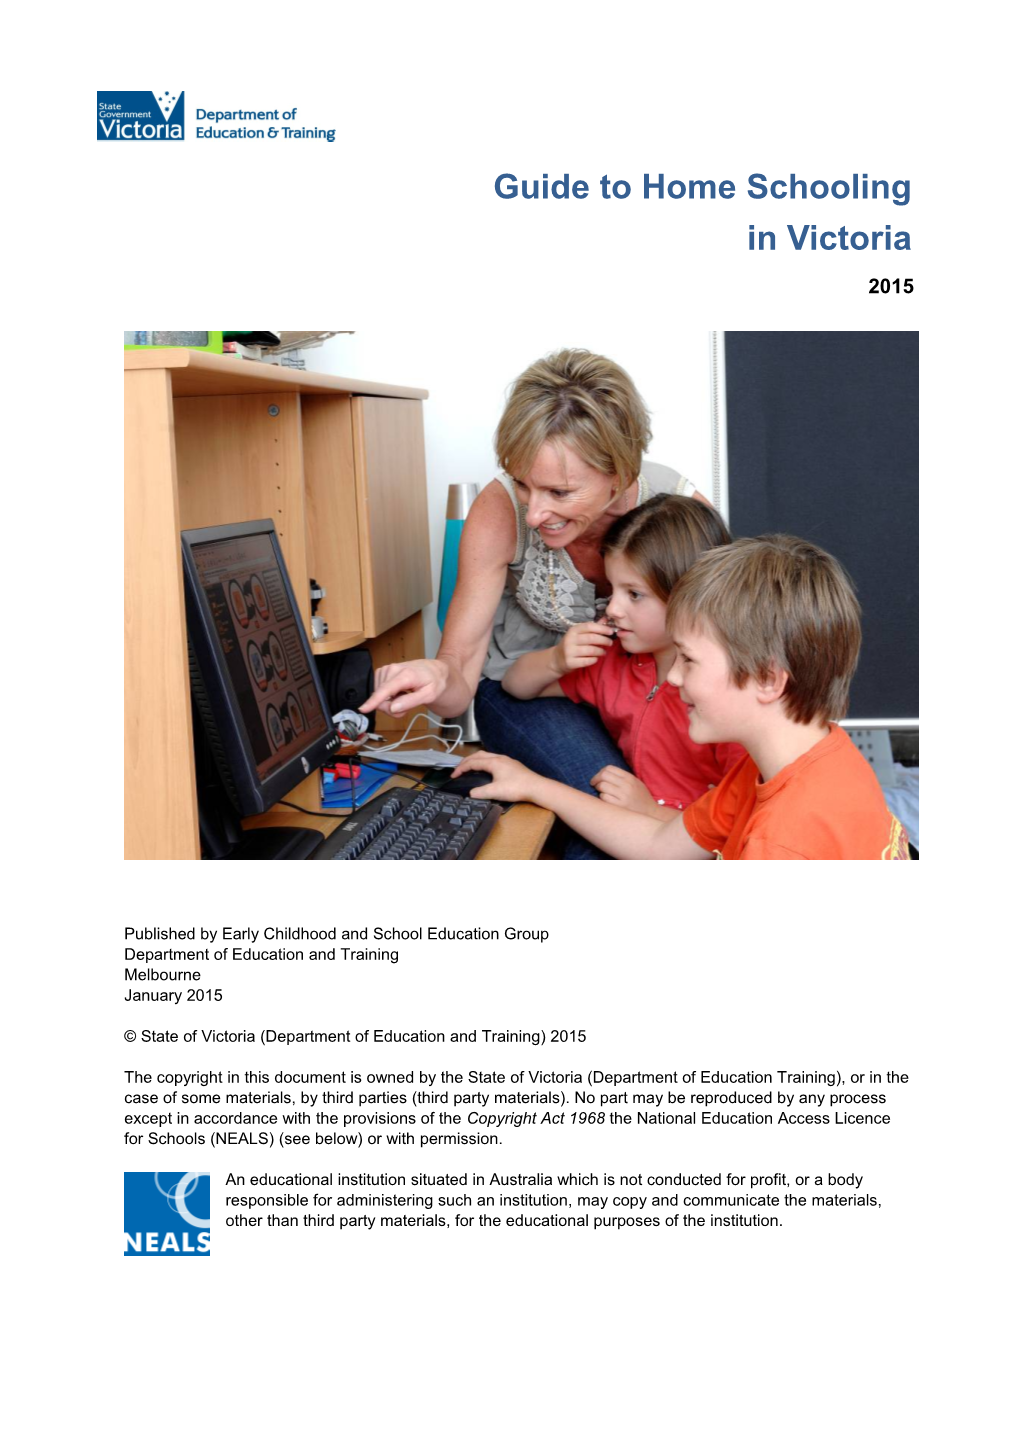 Guide to Home Schooling in Victoria